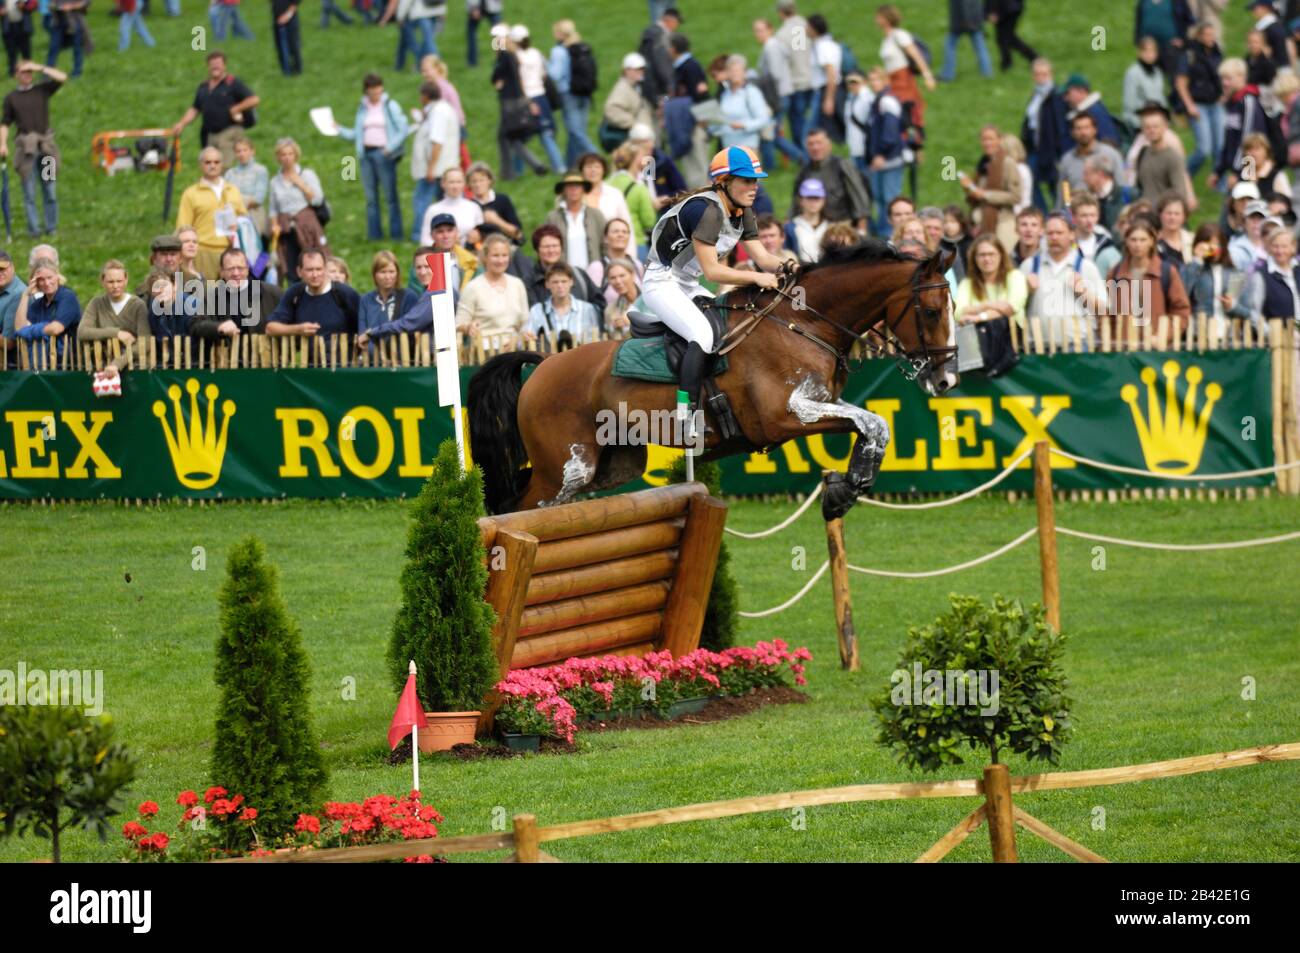 World Equestrian Games, Aachen, - August 26, 2006, Eventing Cross Country Stock Photo